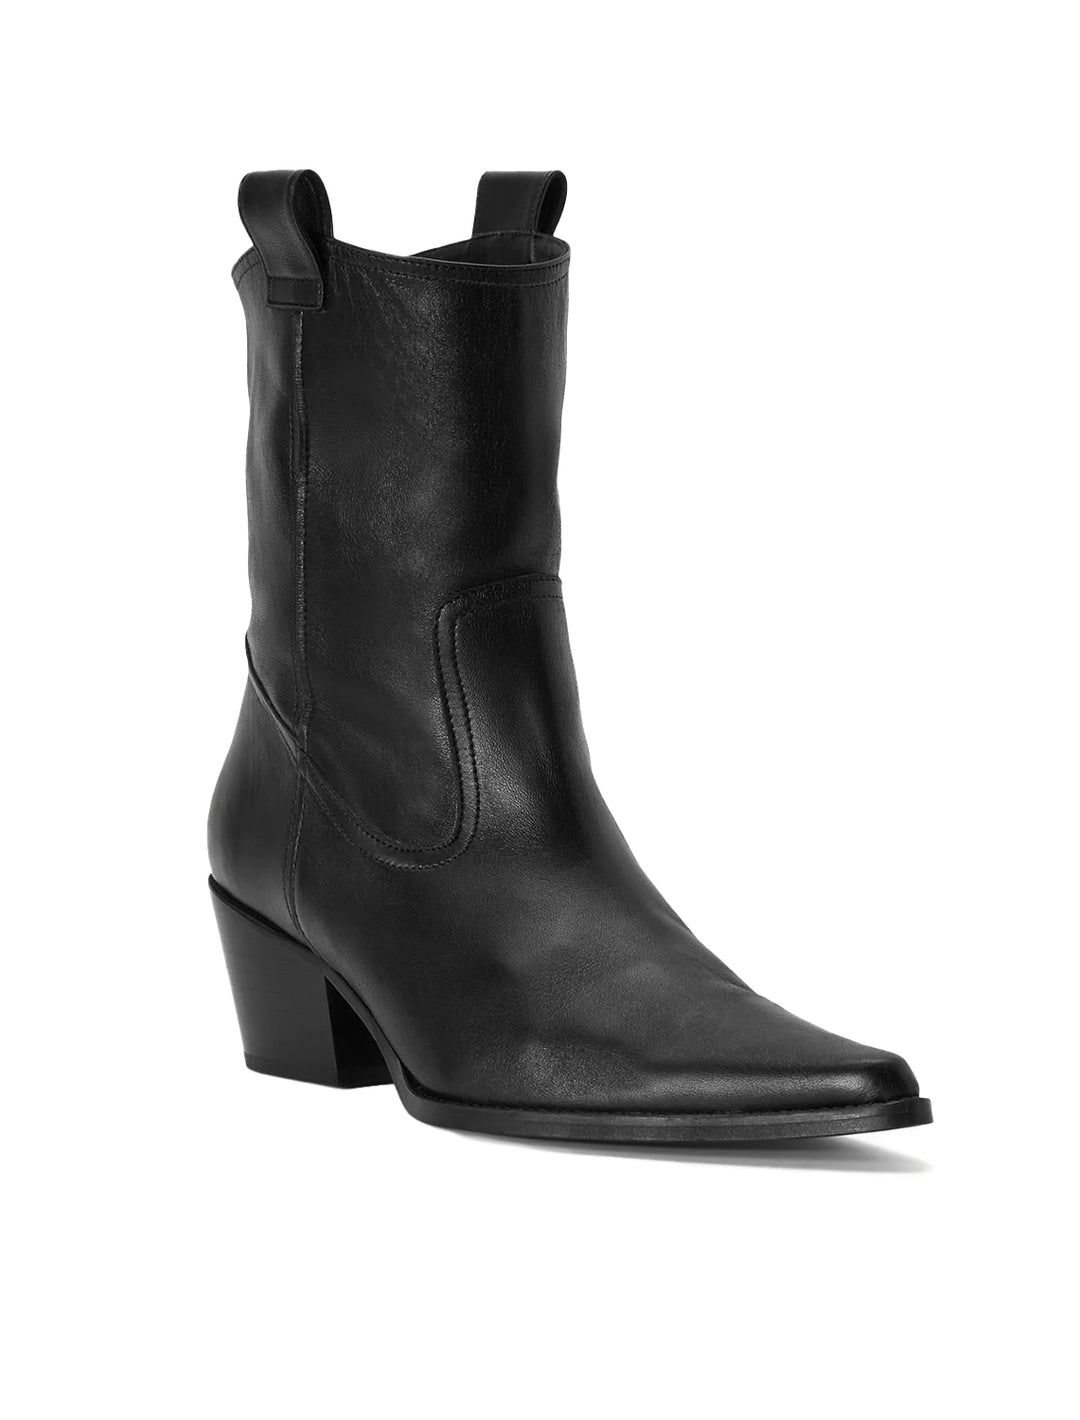 Front angle view of STAUD's june boot in black.